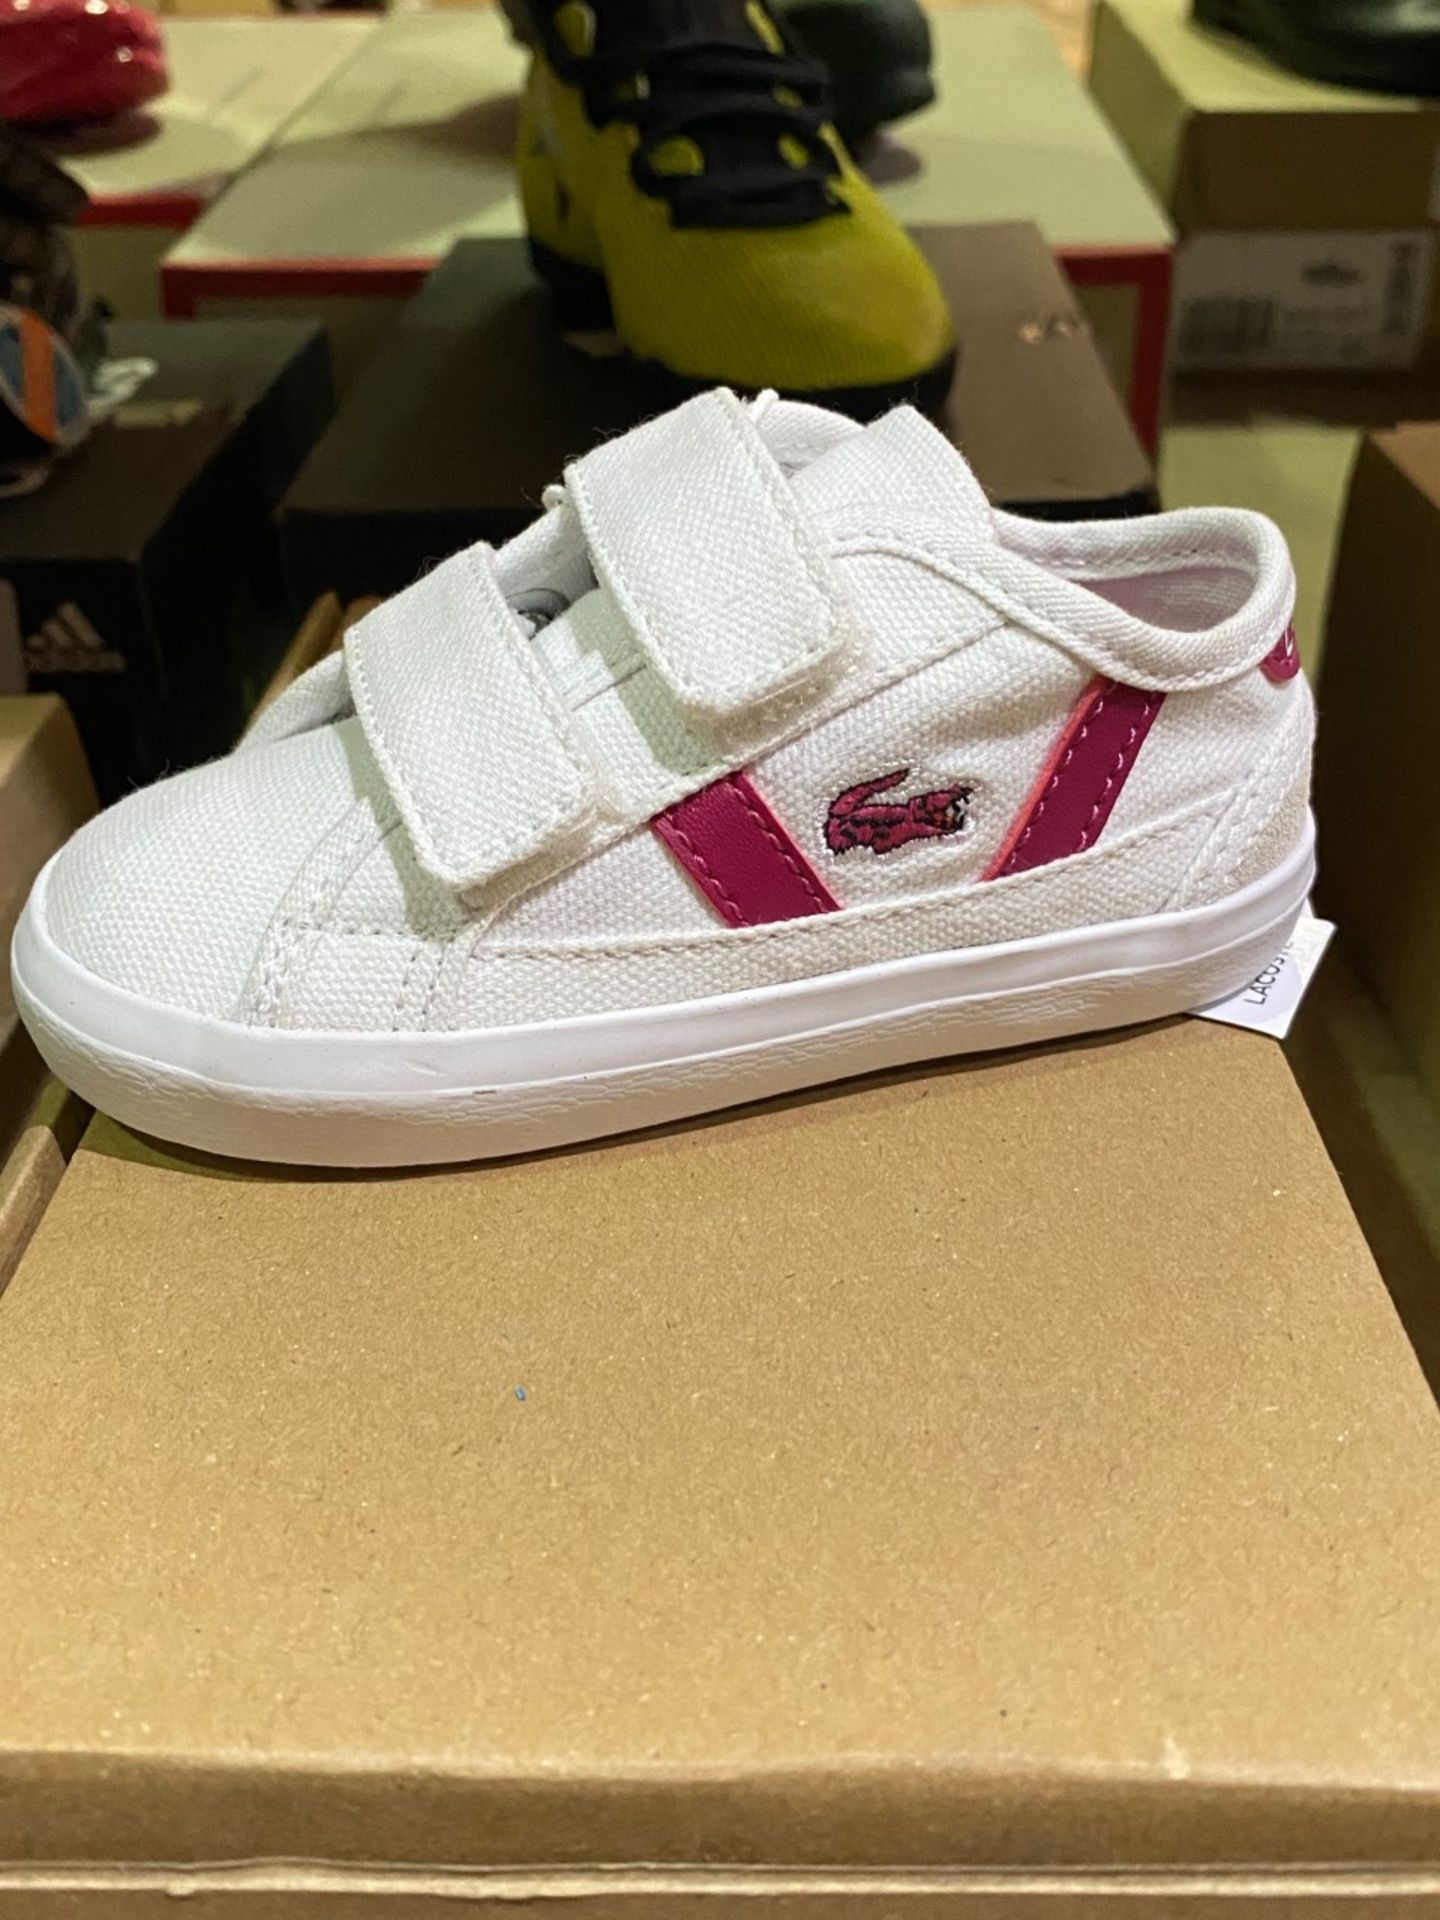 NEW & BOXED LACOSTE WHITE/PINK TRAINER SIZE INFANT 4